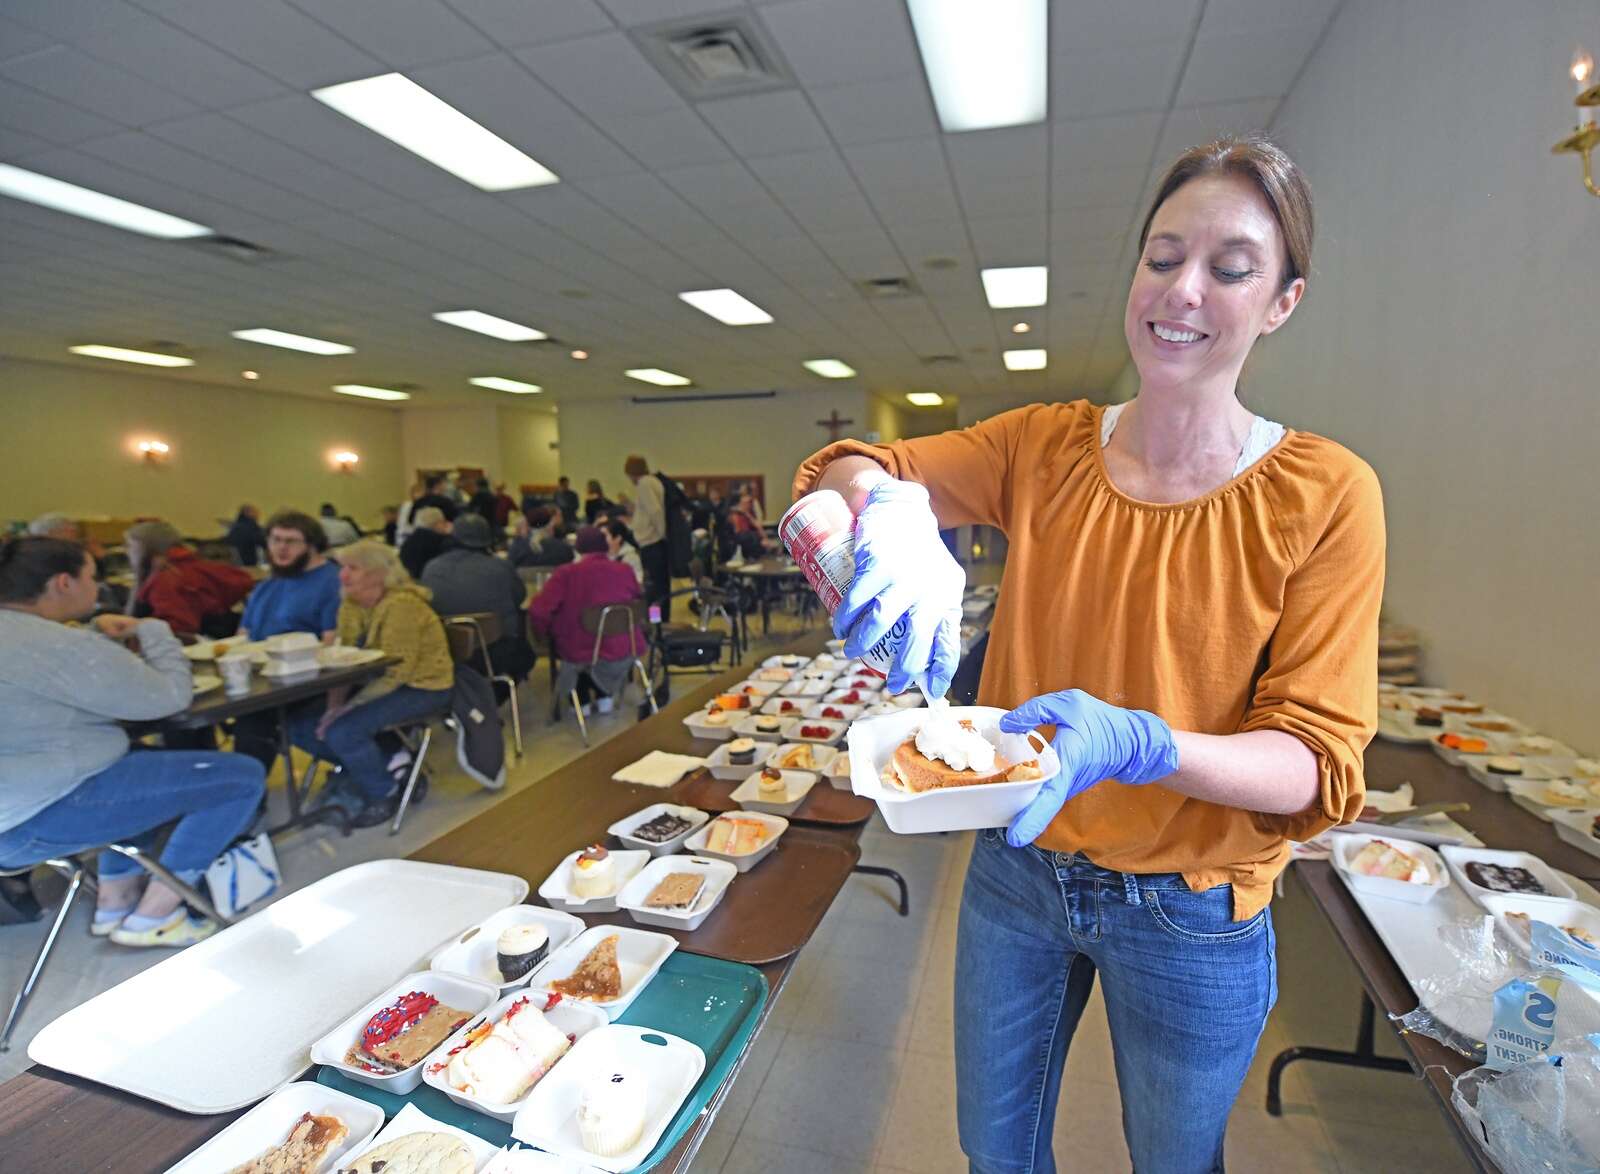 Volunteers serve food at the Thanksgiving Community Meal at St. Peter Roman Catholic Church